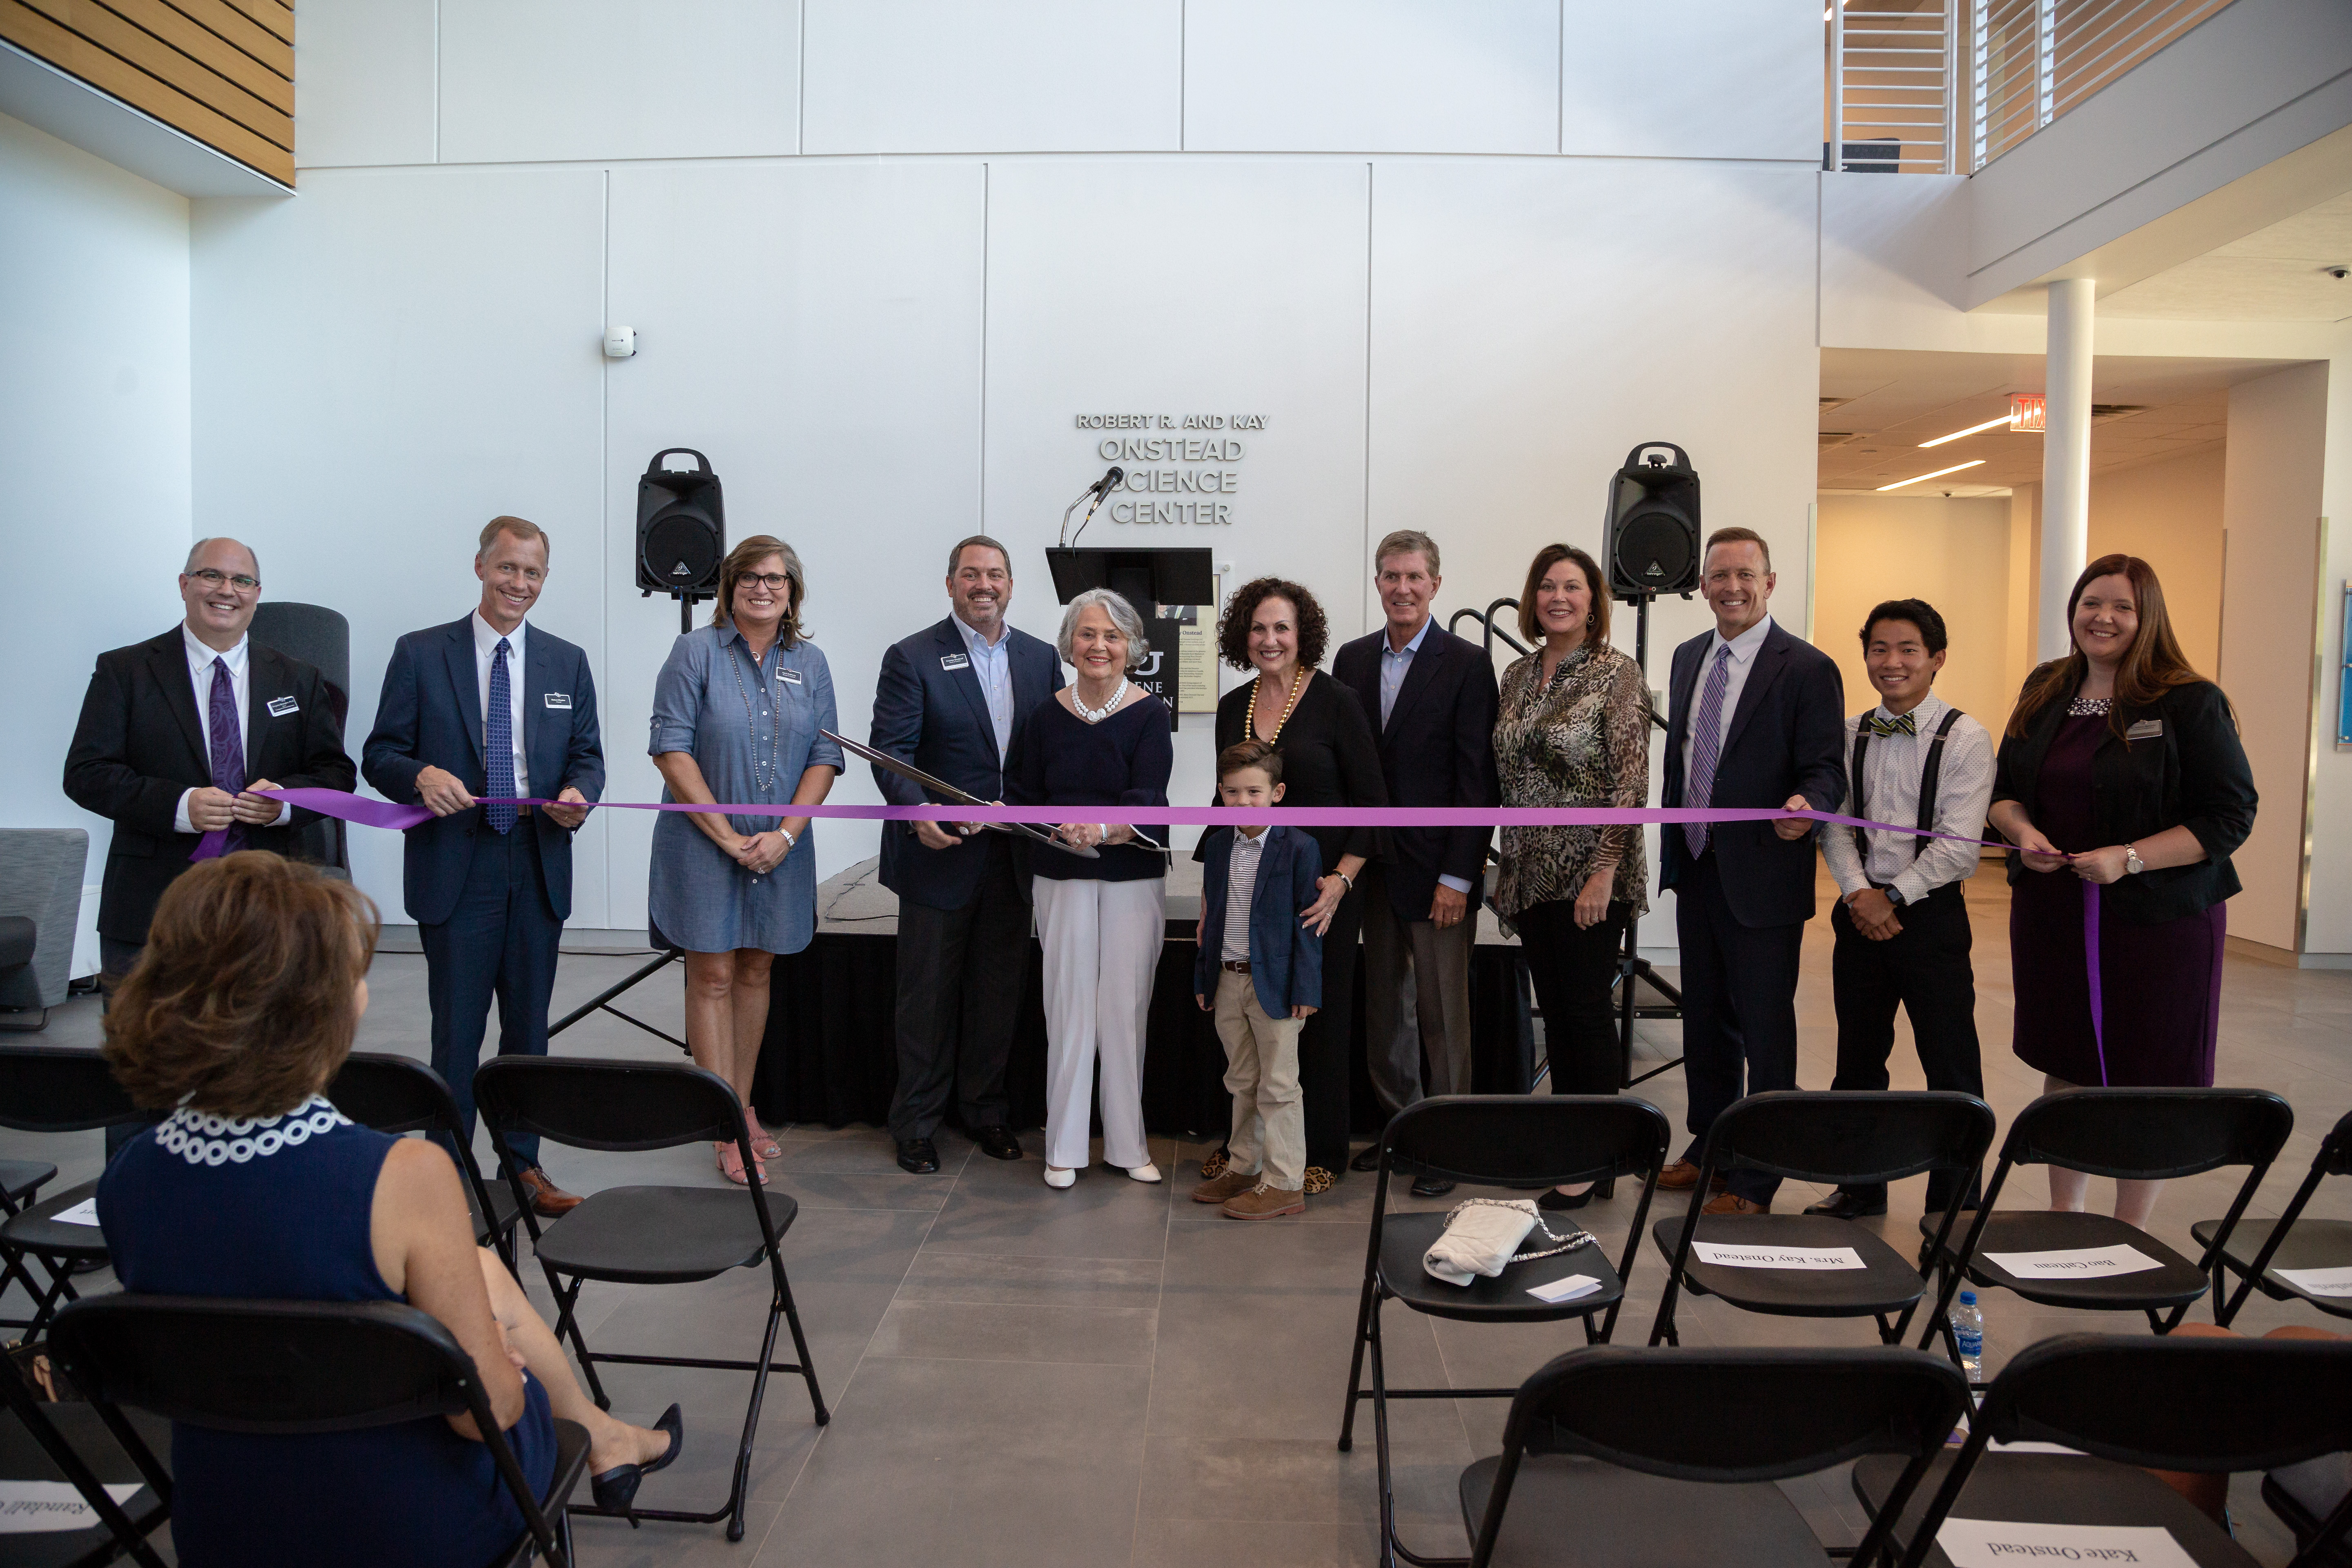 The opening of the Robert R. and Kay Onstead Science Center featured the cutting of a ceremonial ribbon. Pictured from left: Dr. Gregory Straughn, dean of the College of Arts and Sciences; Dr. Robert Rhodes, provost; April Anthony, chair of the Board of Trustees; Charlie Onstead; Kay Onstead; Ann Hill; Randall Onstead; Mary Onstead; Dr. Phil Schubert, president; Bao Catteau, sophomore; and Dr. Autumn Sutherlin, assistant dean of the College of Arts and Sciences.